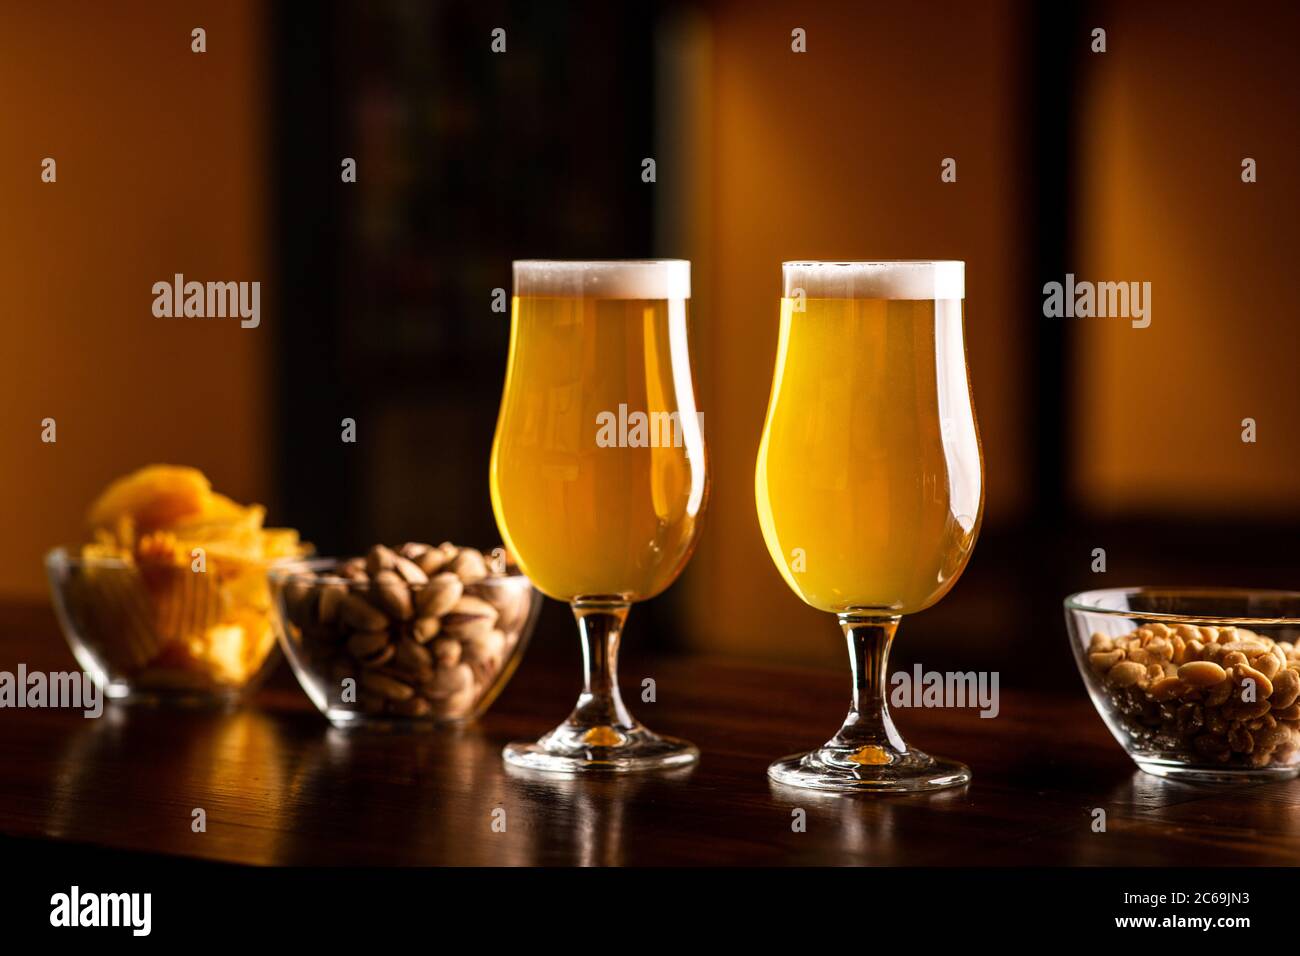 Two glasses with light beer and foam on wooden bar counter in interior of pub, pistachios, crackers and nuts in glass plates nearby Stock Photo